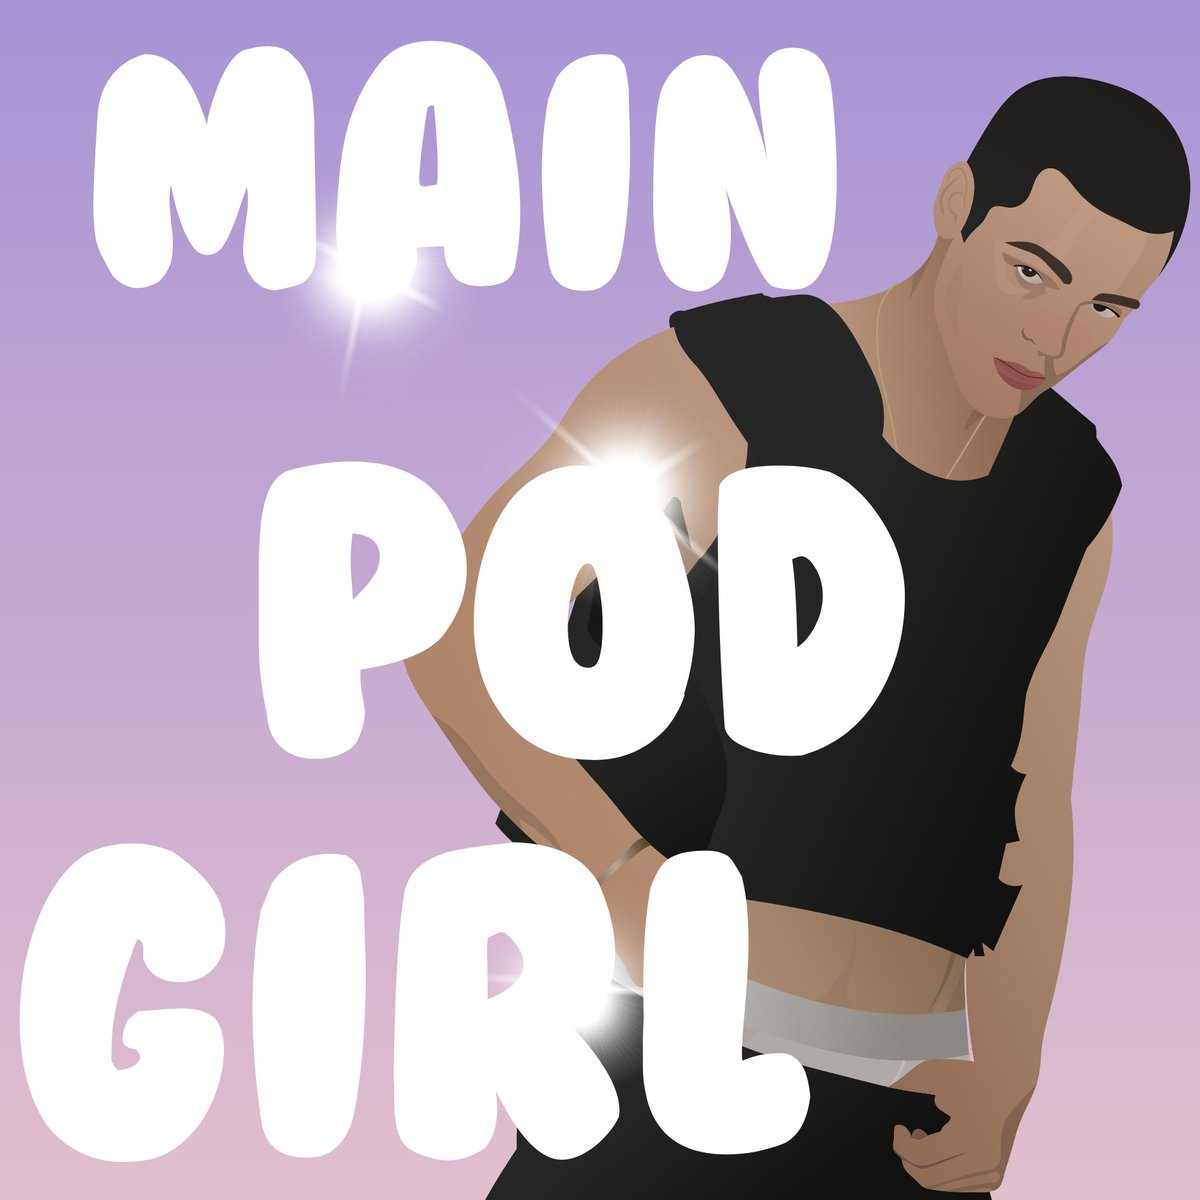 The newest episode of our podcast, Main Pod Girl, is out now! This episode features returning guest @ajmitchell! Listen to the episode & get all the tea on his upcoming album here: link.chtbl.com/AJMitchell